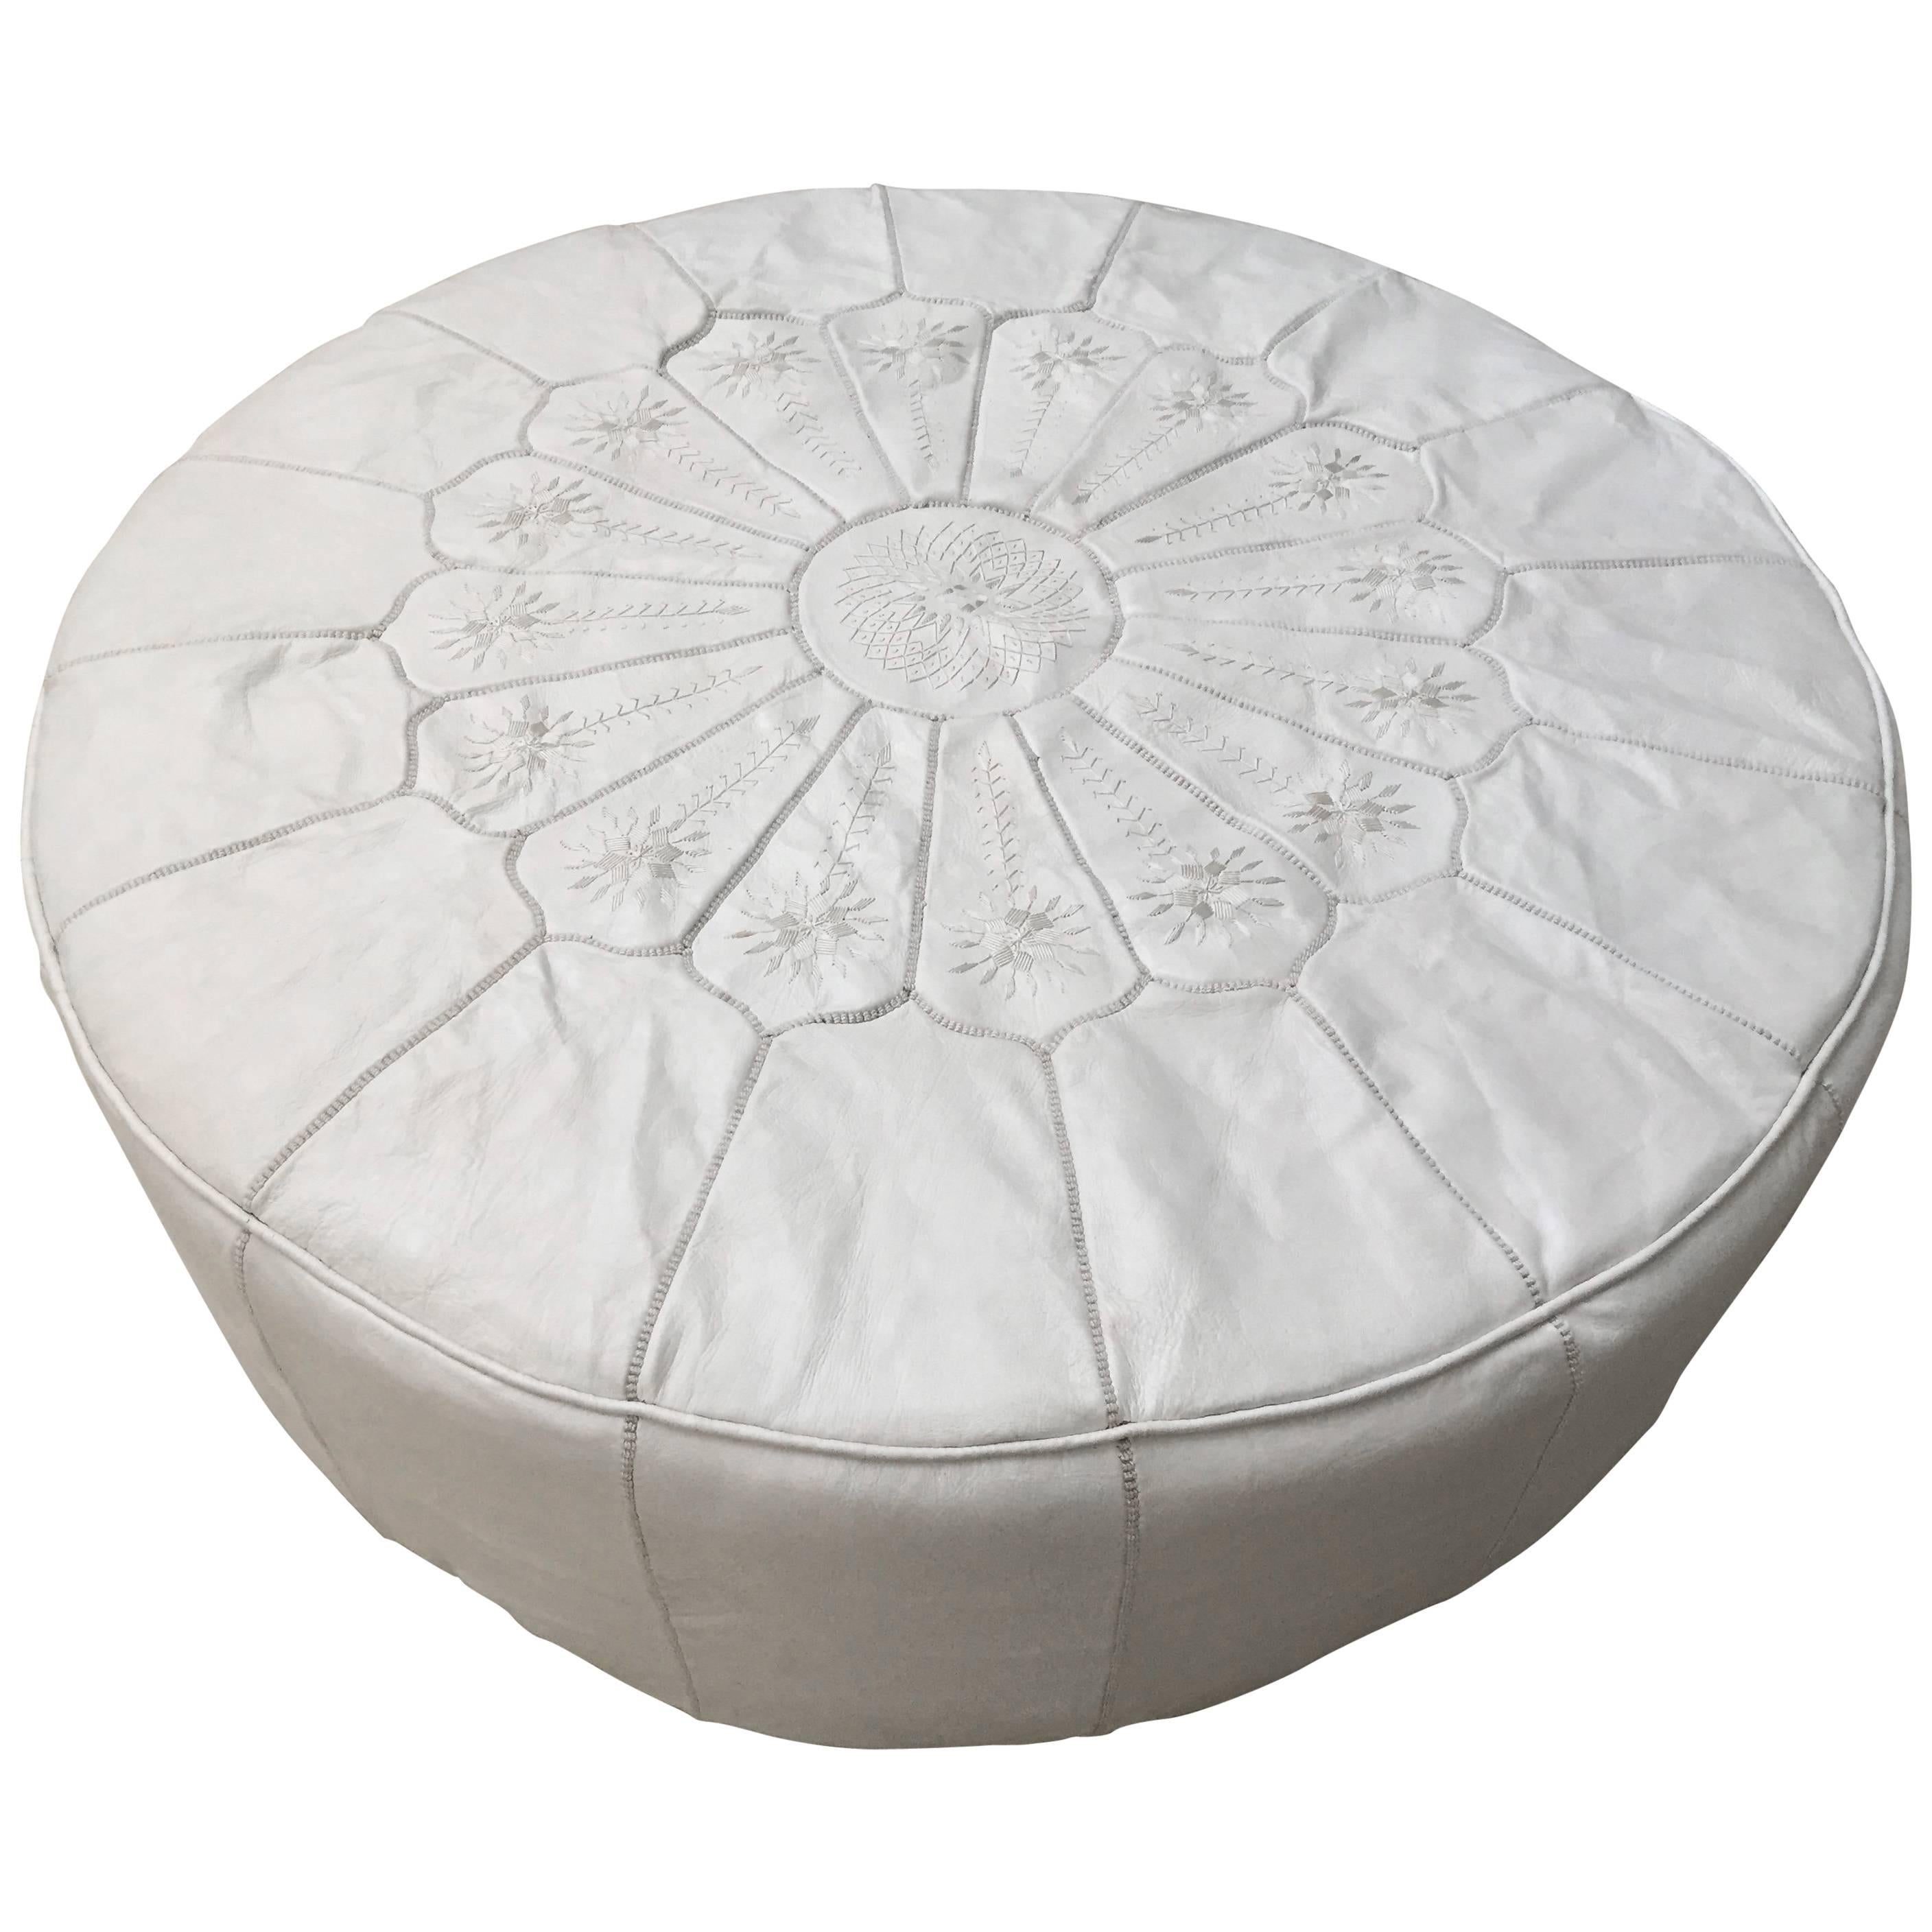 Large Round White Leather Table Ottoman